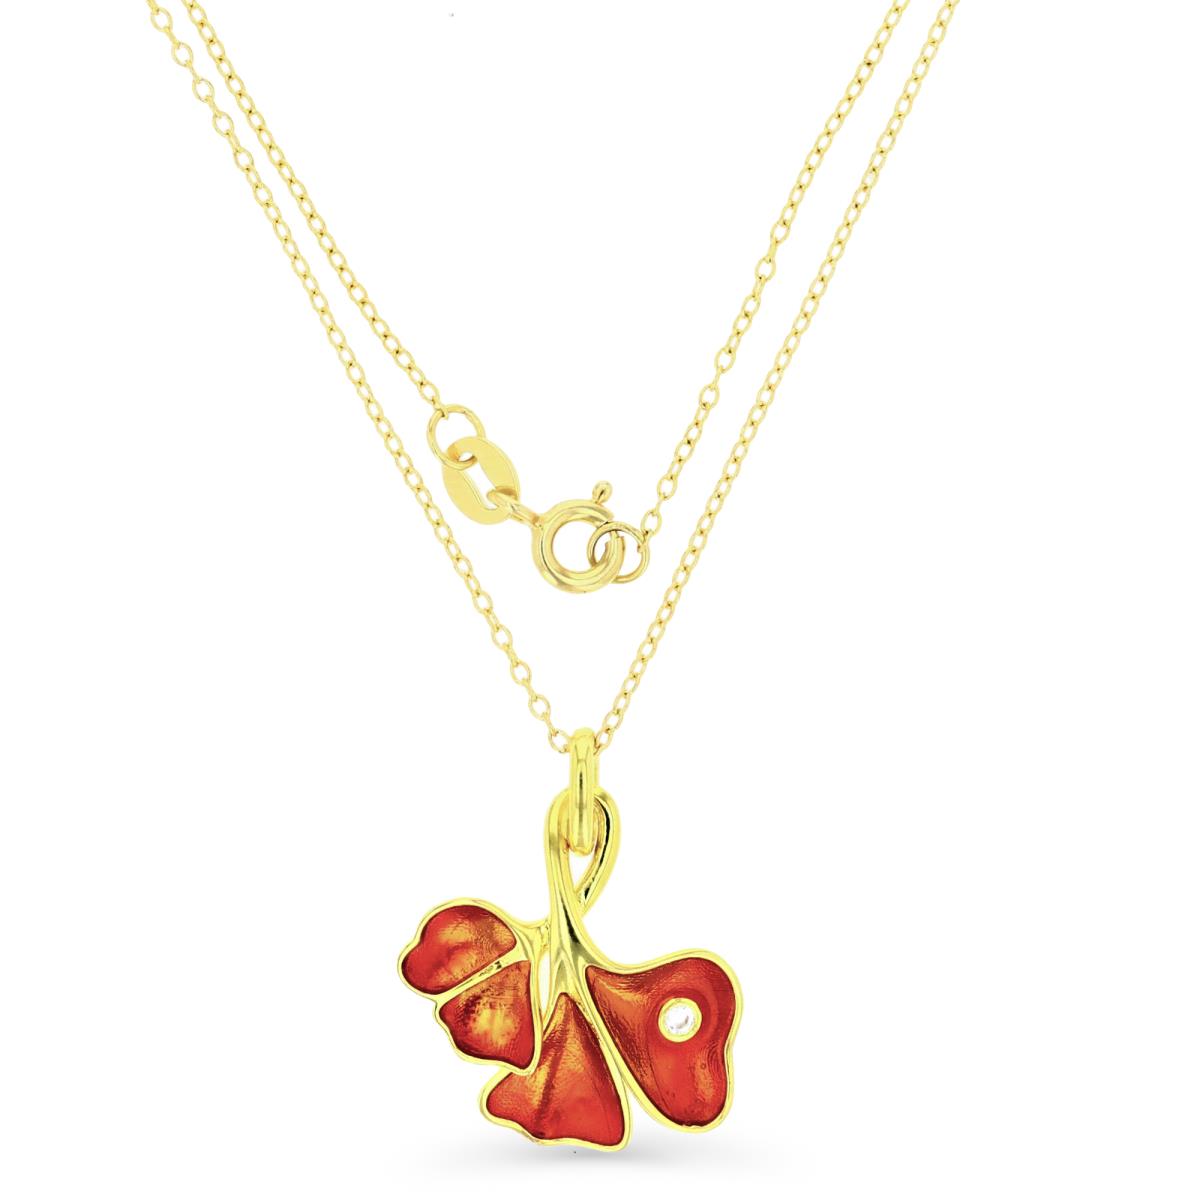 Sterling Silver Yellow Enamel & Cr. White Sapphire Leaves 18" Necklace